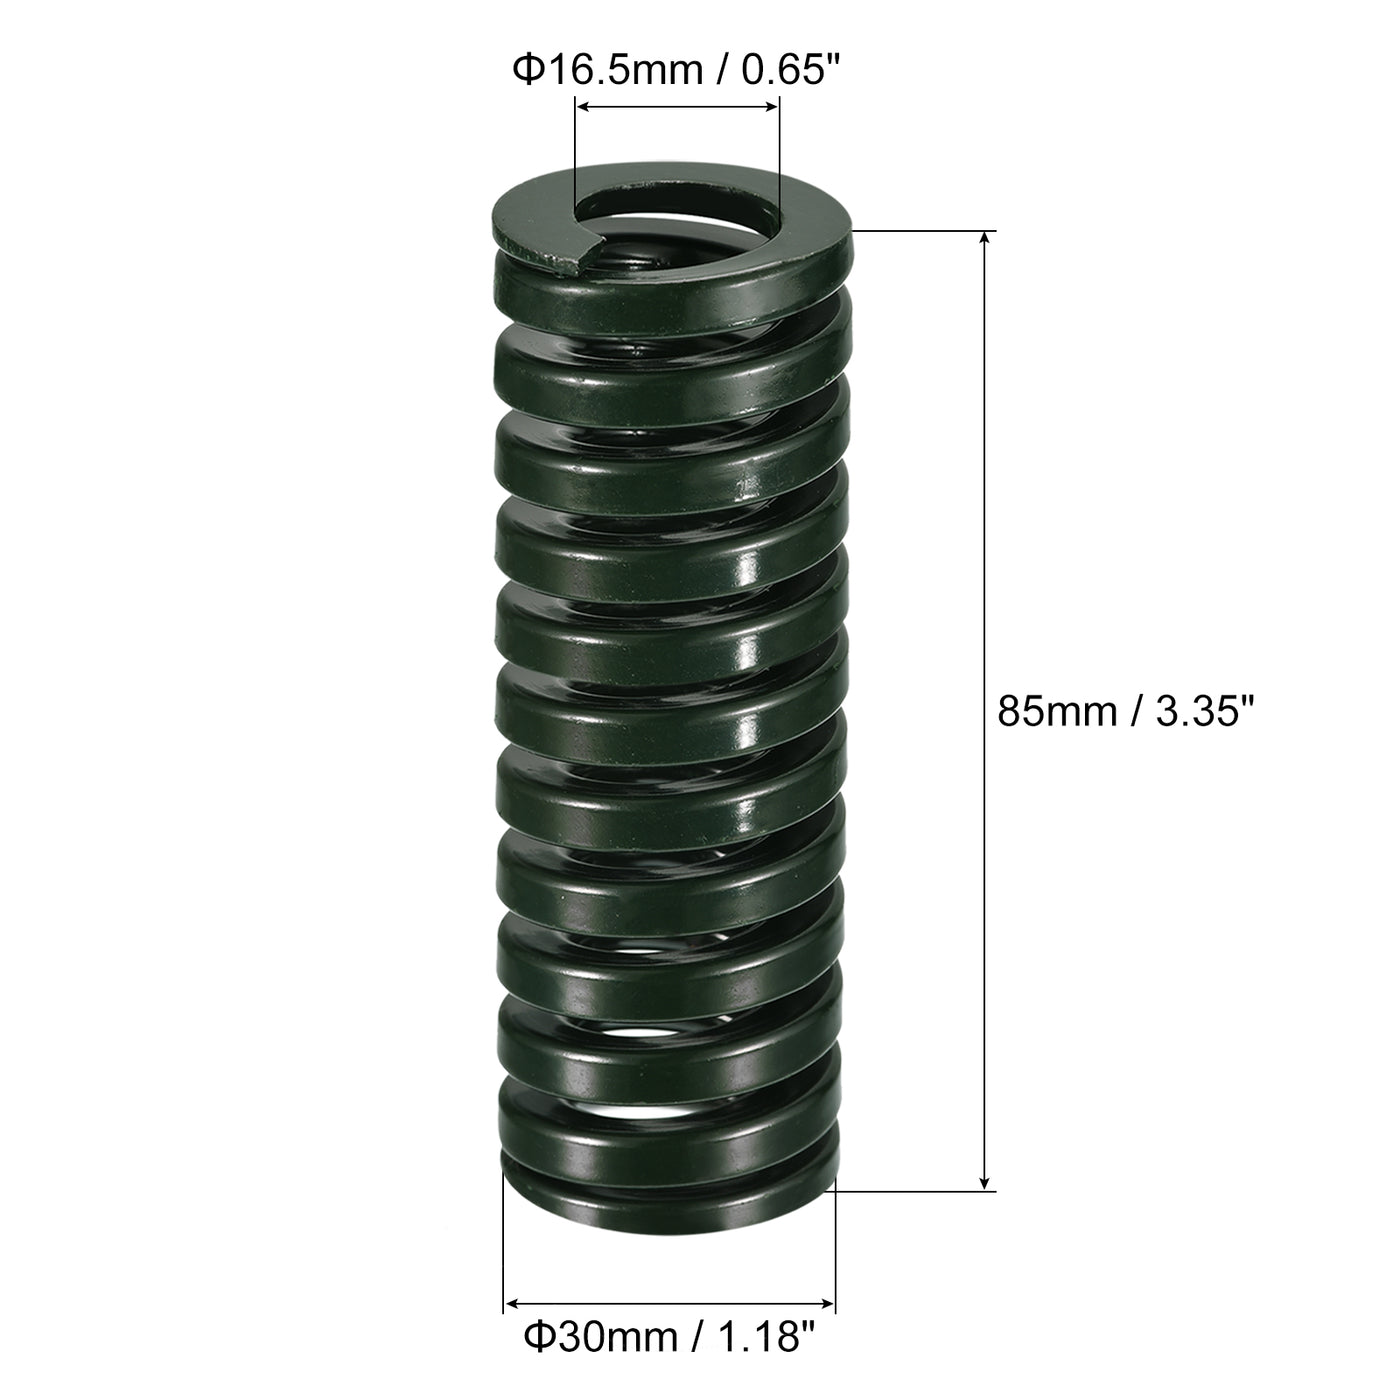 uxcell Uxcell 3D Printer Die Spring, 2pcs 30mm OD 85mm Long Spiral Stamping Compression Green